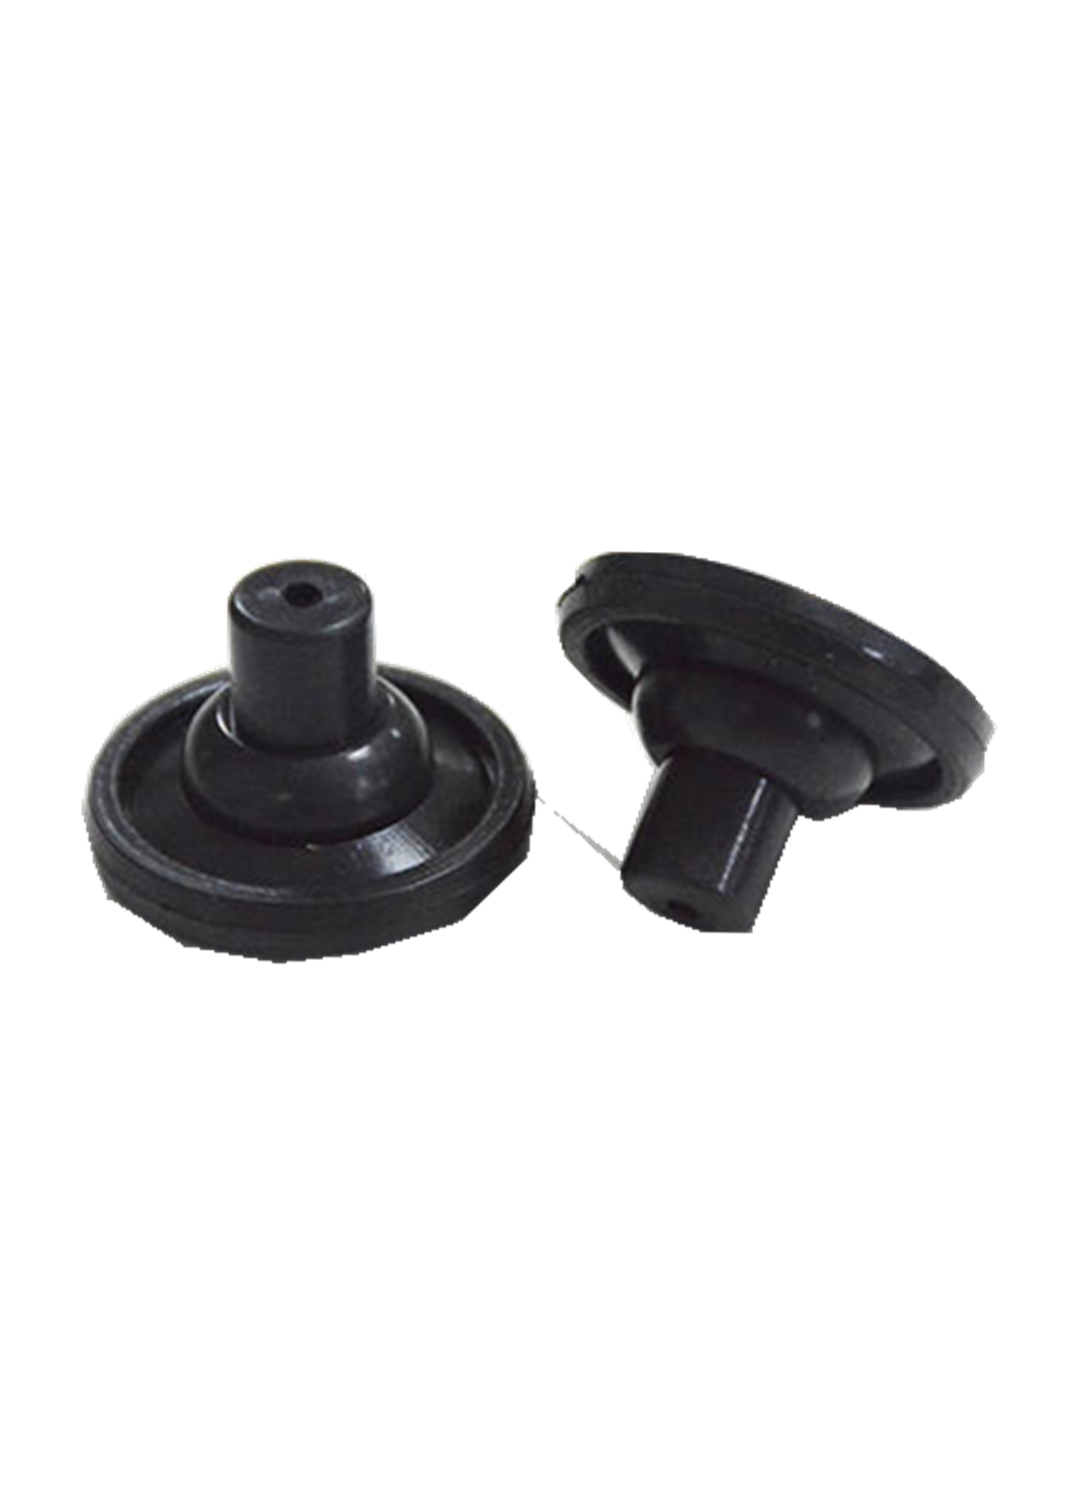 Metal & Rubber vibration isolator mounting bracket for air conditioner